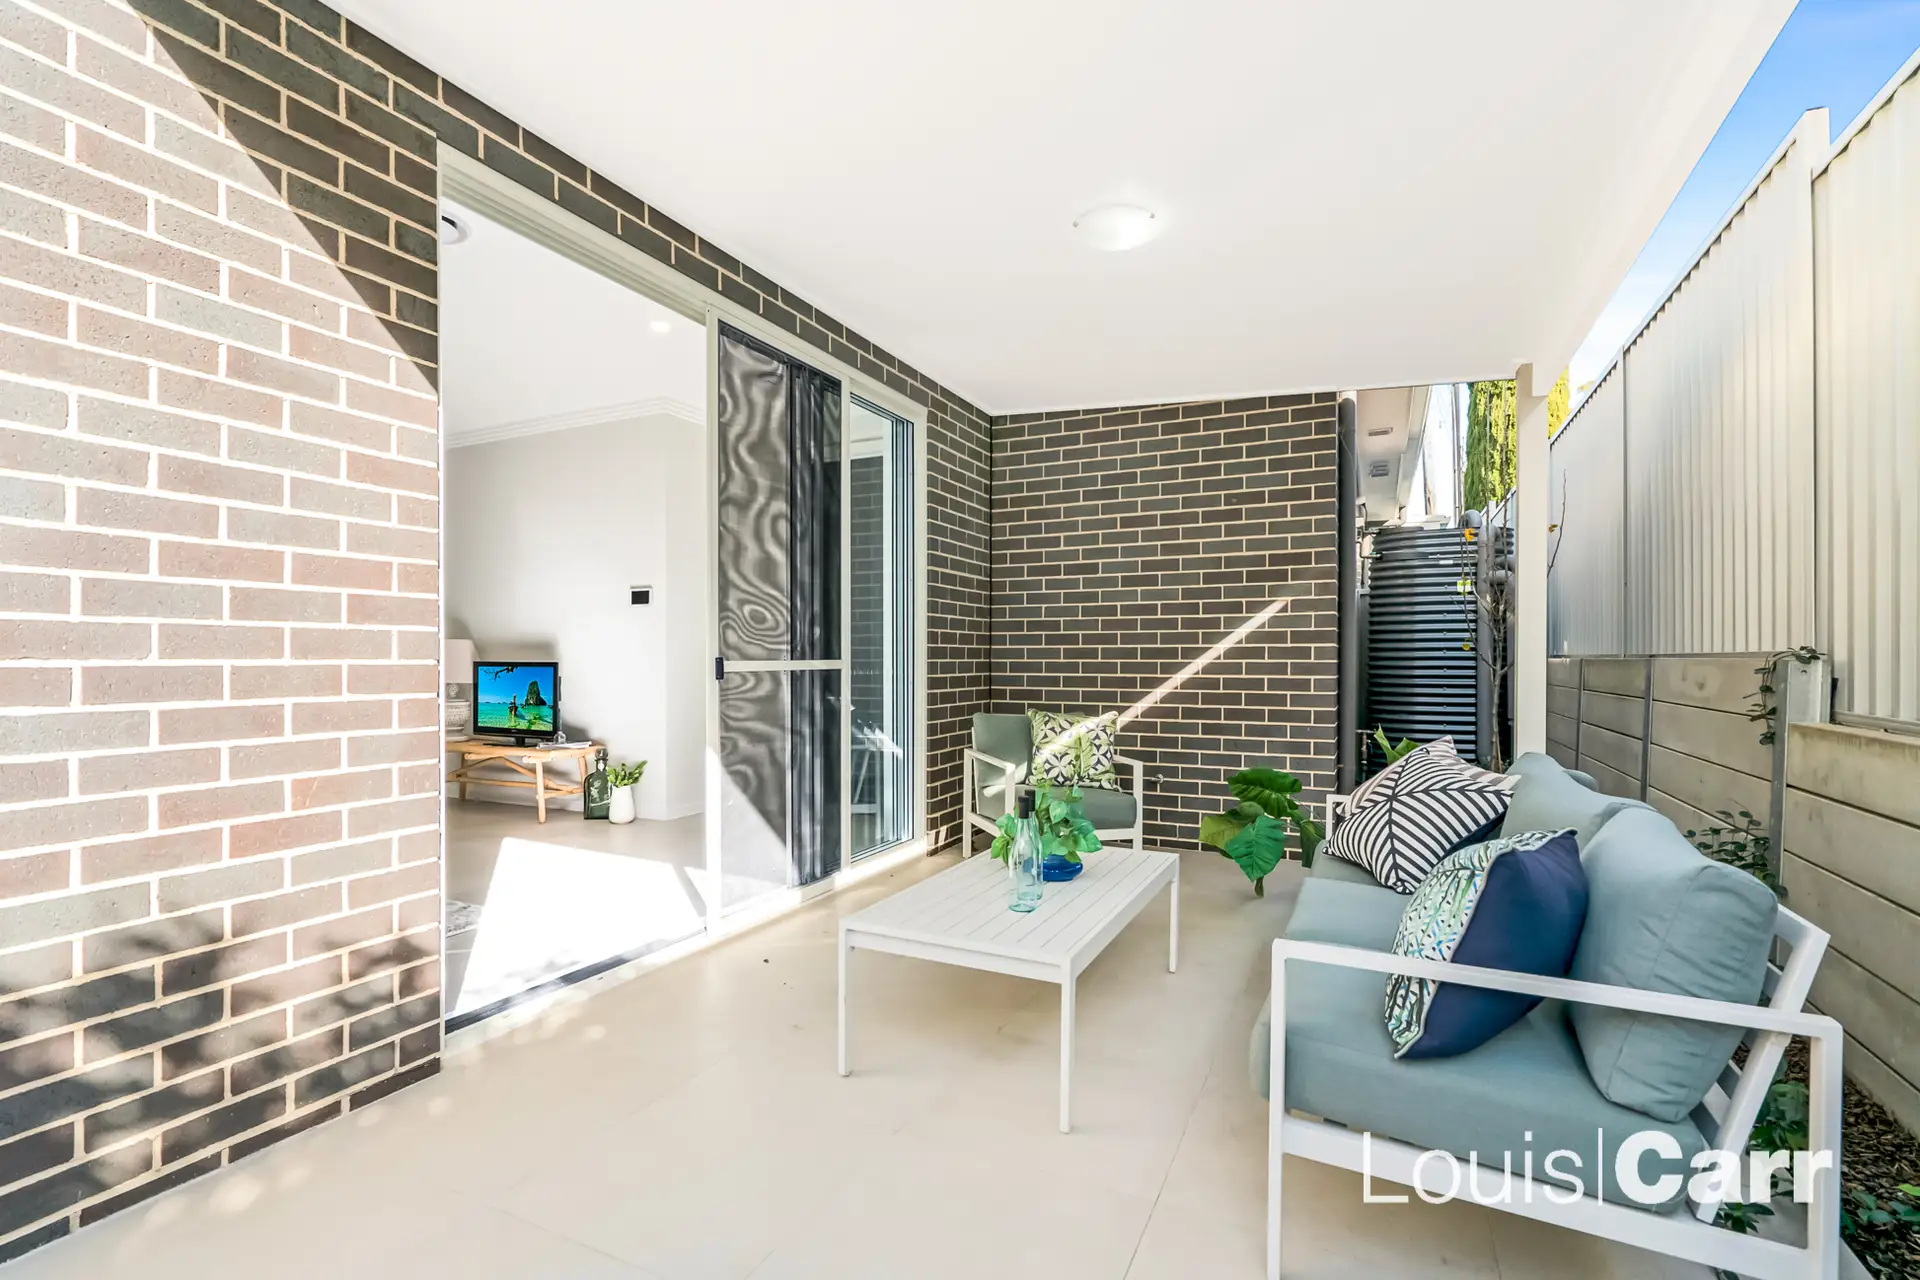 Photo #9: 2/18-20 Cardinal Avenue, Beecroft - Sold by Louis Carr Real Estate